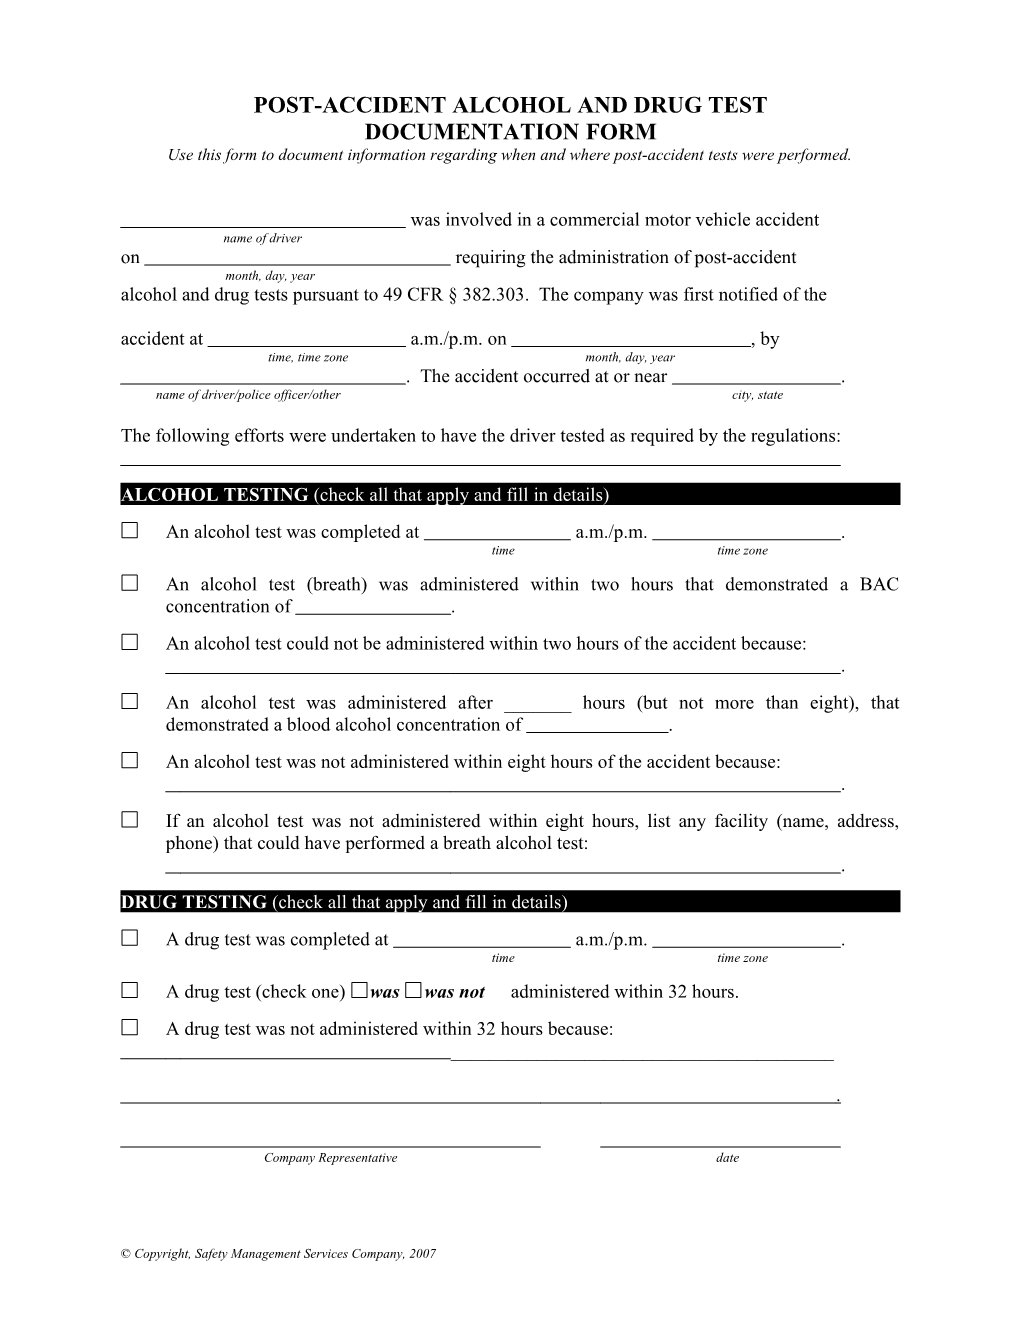 Post-Accident Alcohol and Drug Test Documentation Form